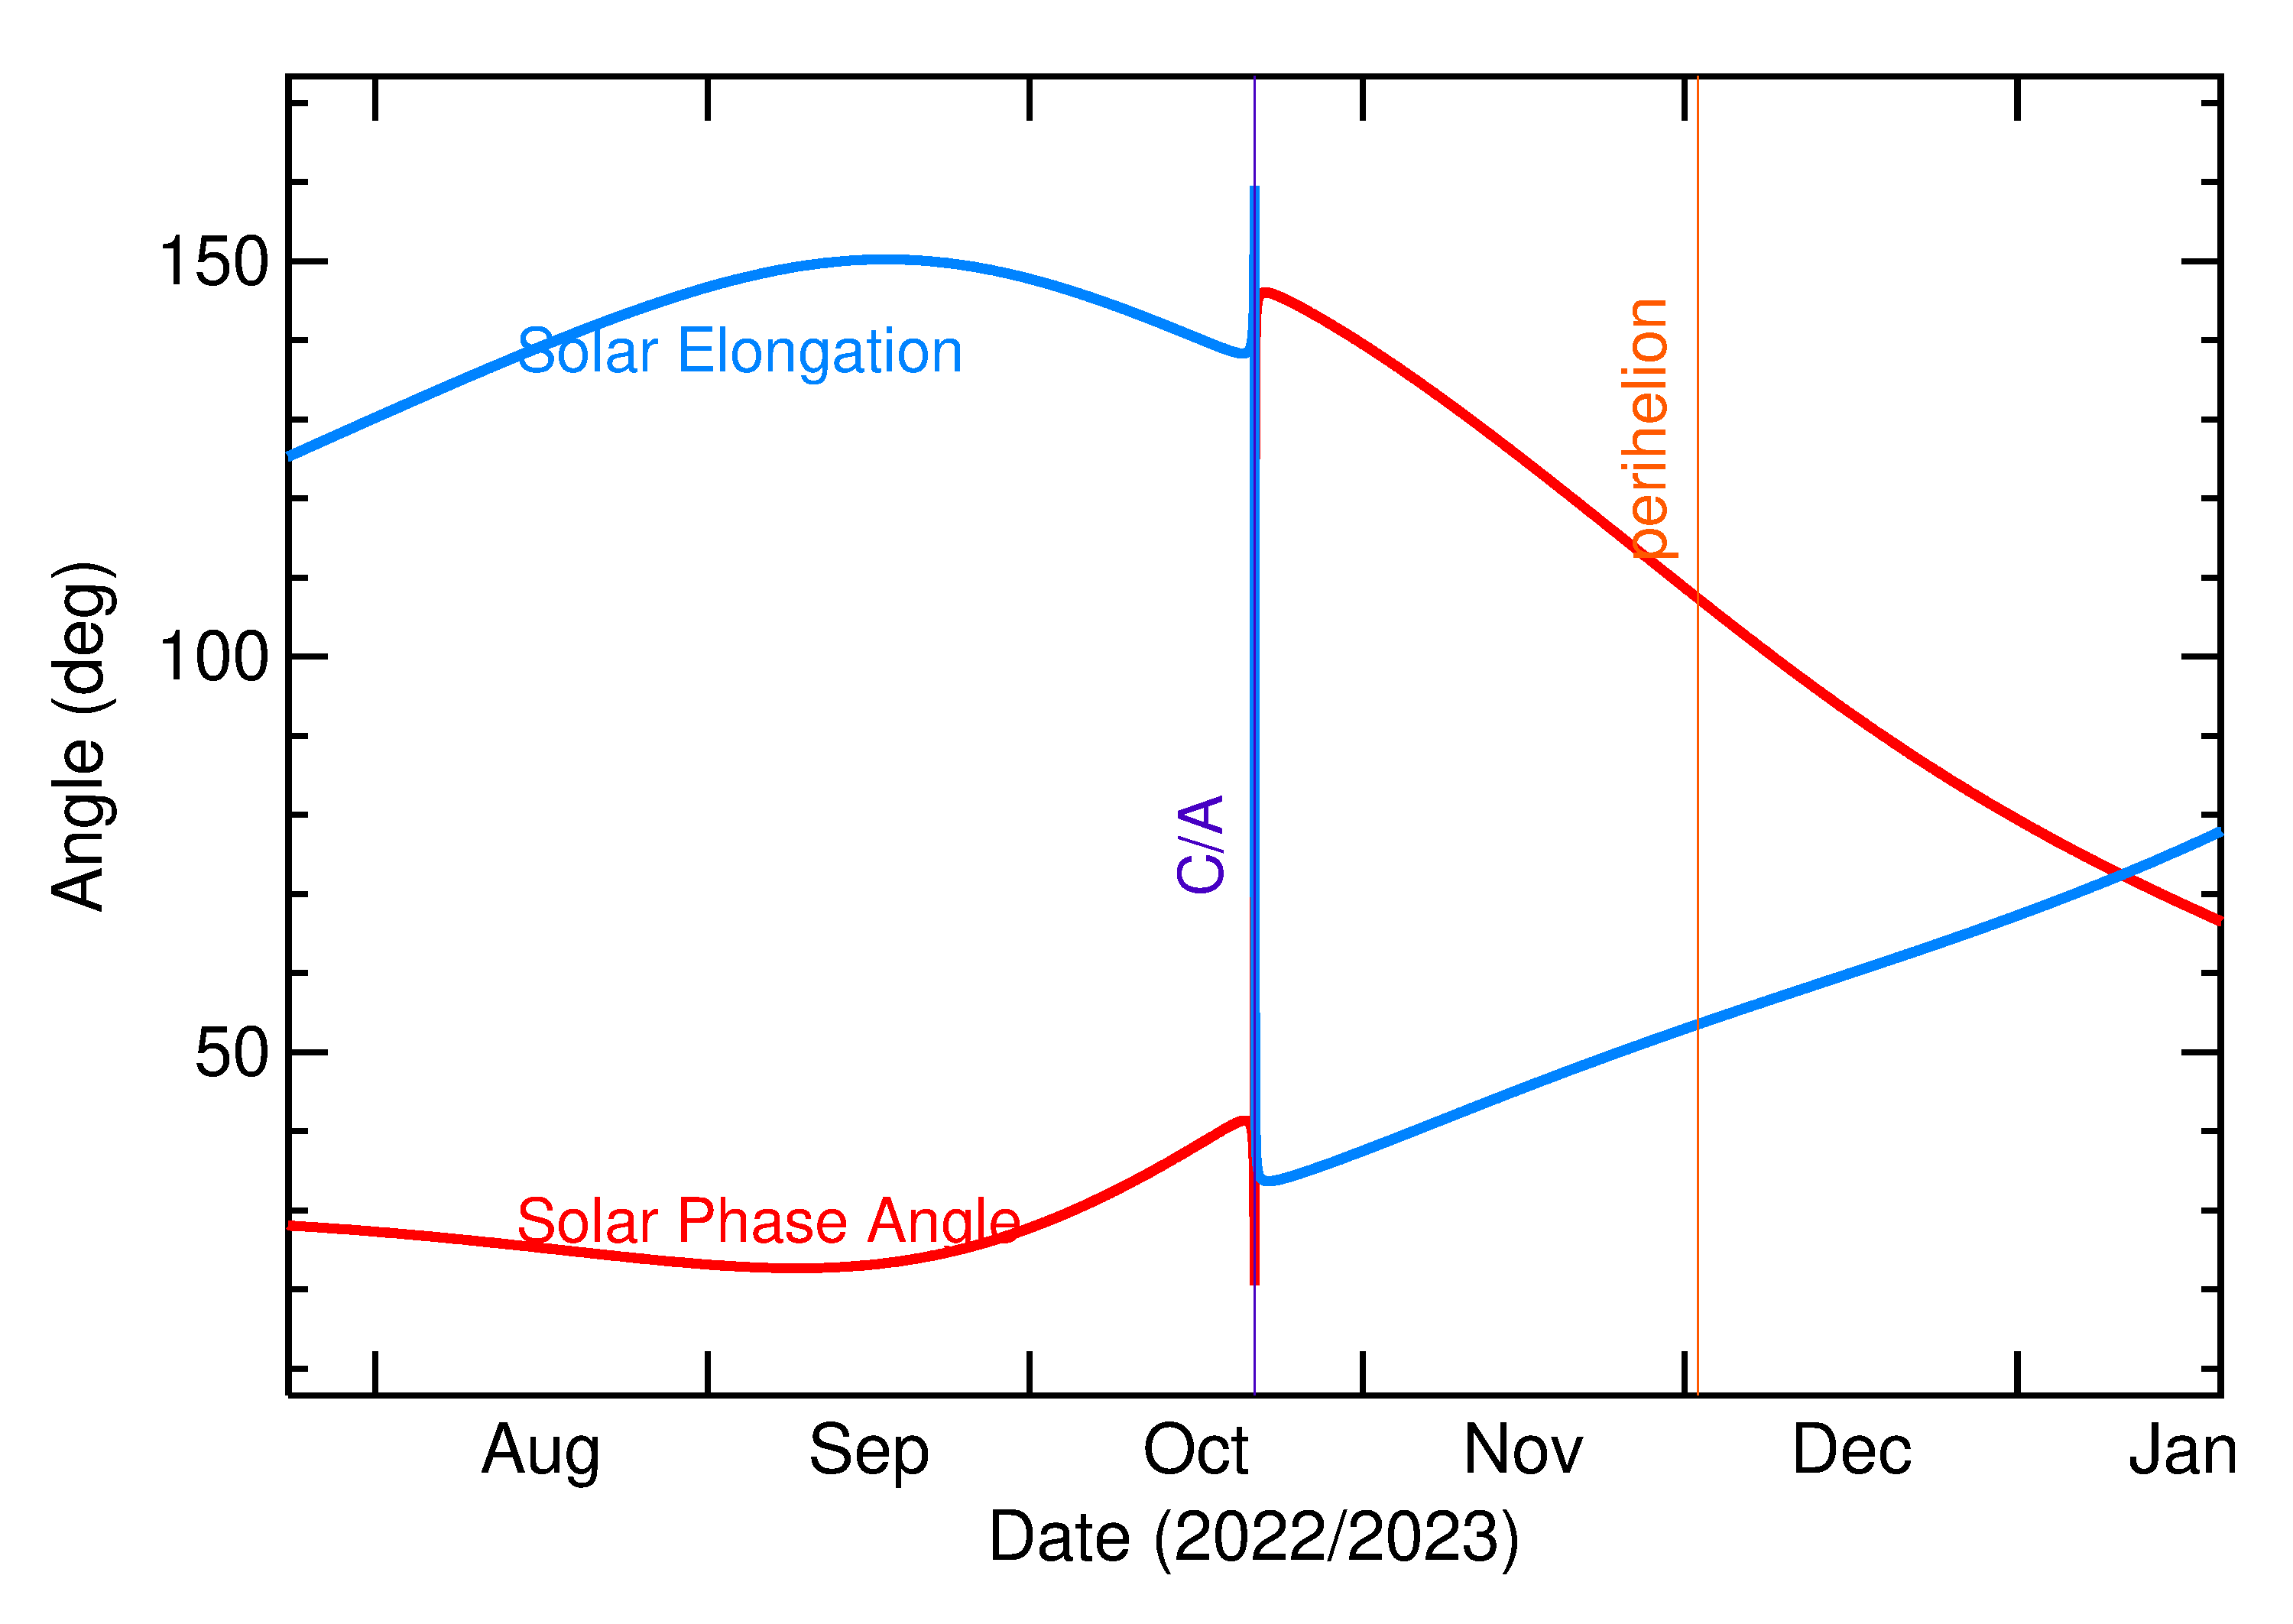 Solar Elongation and Solar Phase Angle of 2022 UR4 in the months around closest approach